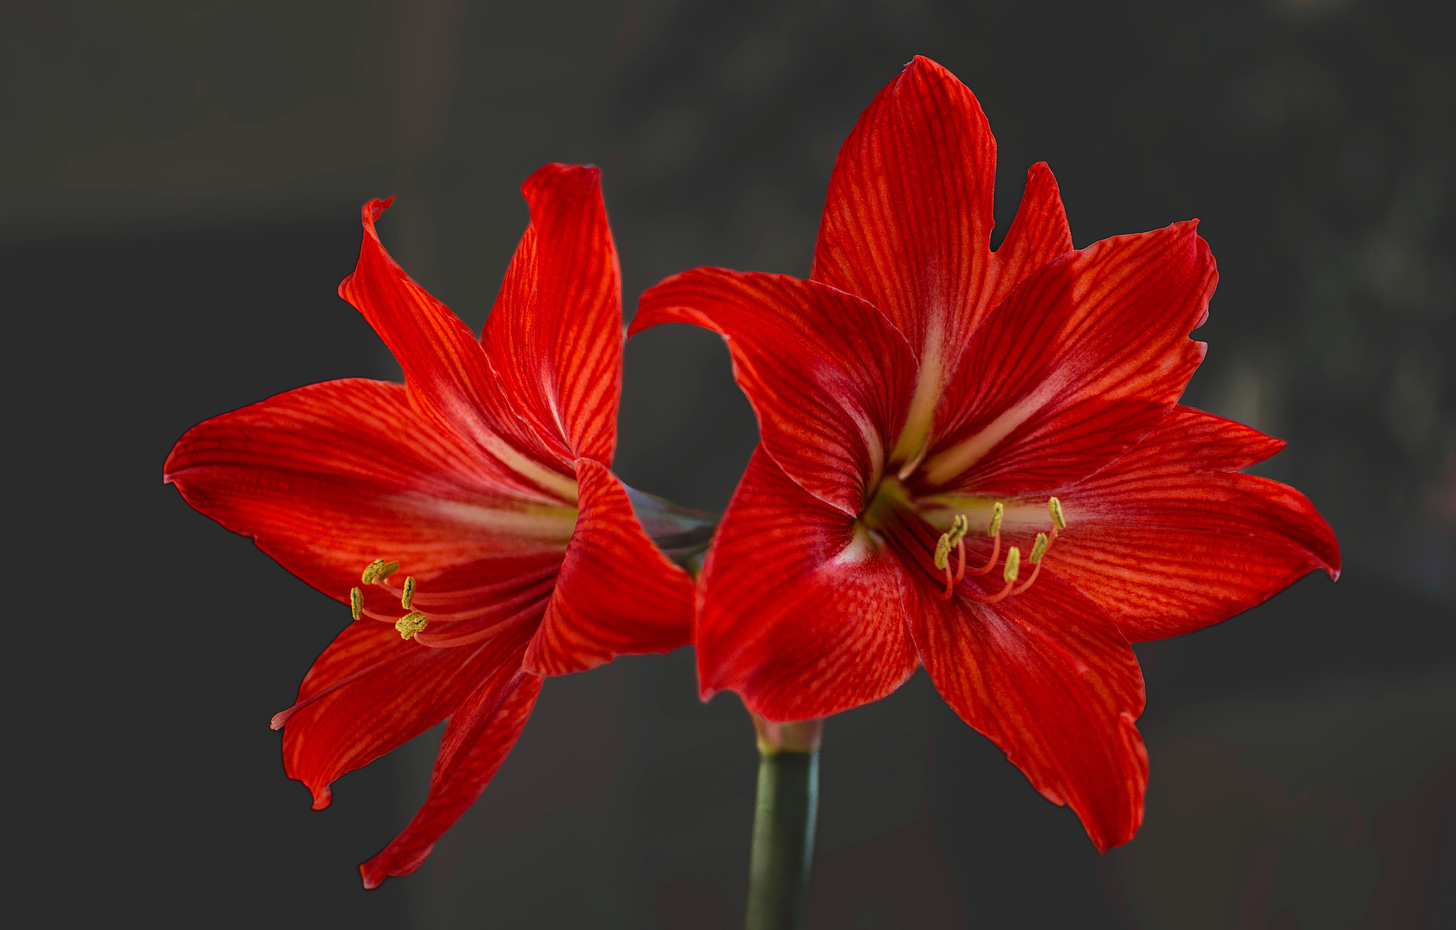 Two red Amyrilis blooms against a dark background